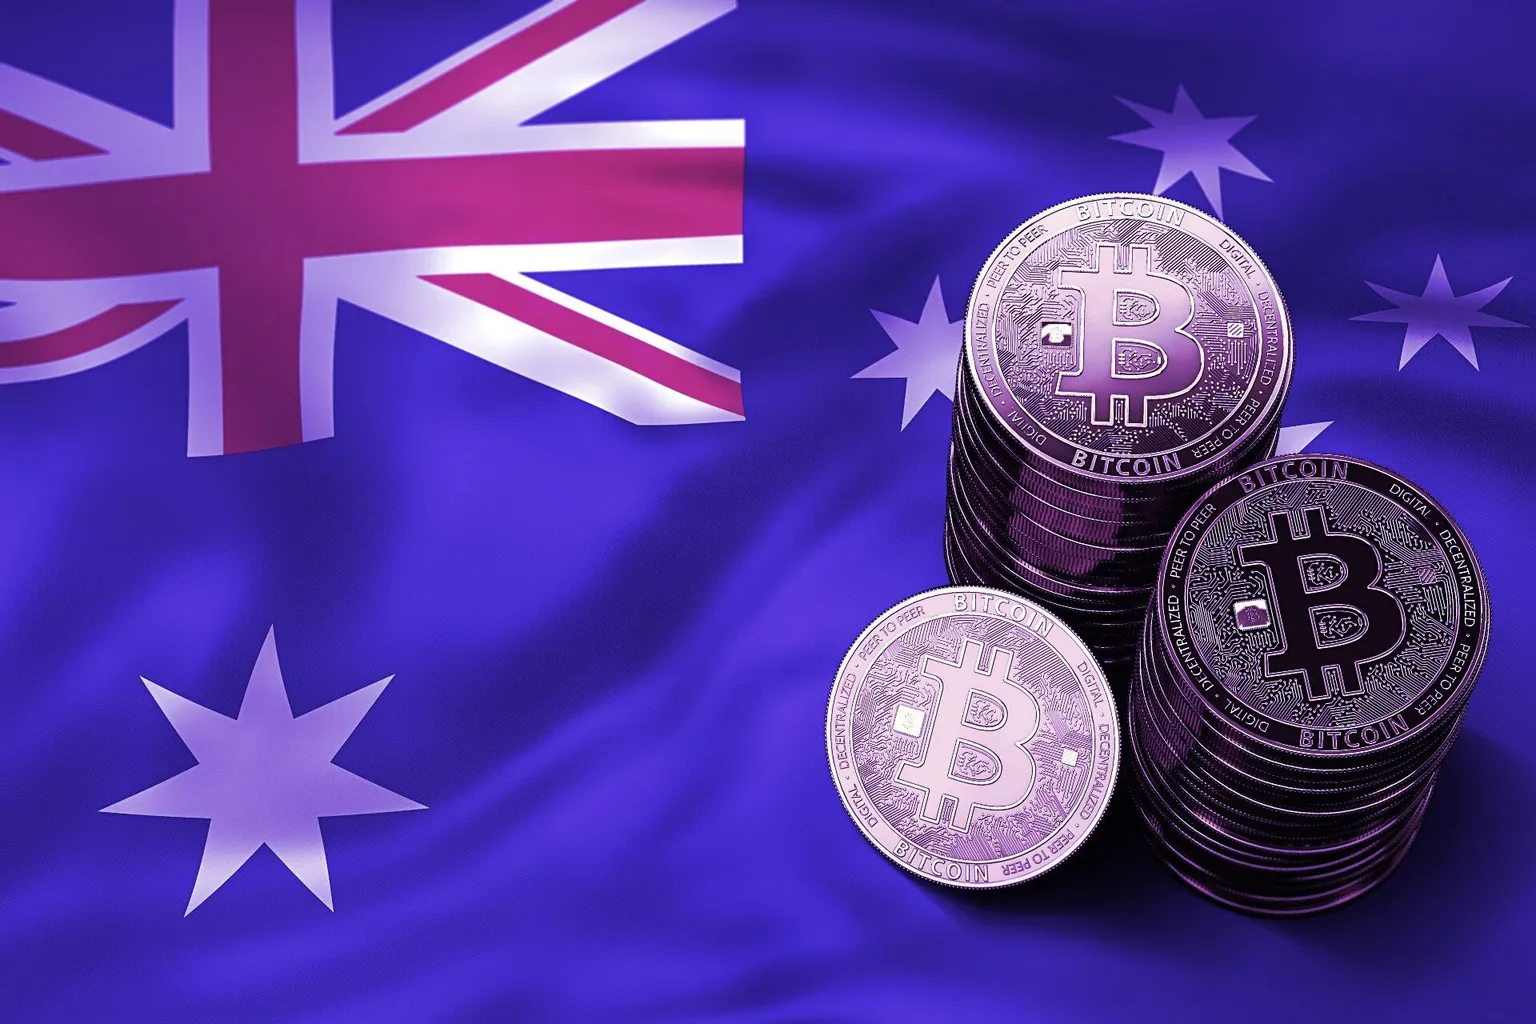 Cryptocurrencies are becoming increasingly popular in Australia. Image: Shutterstock.